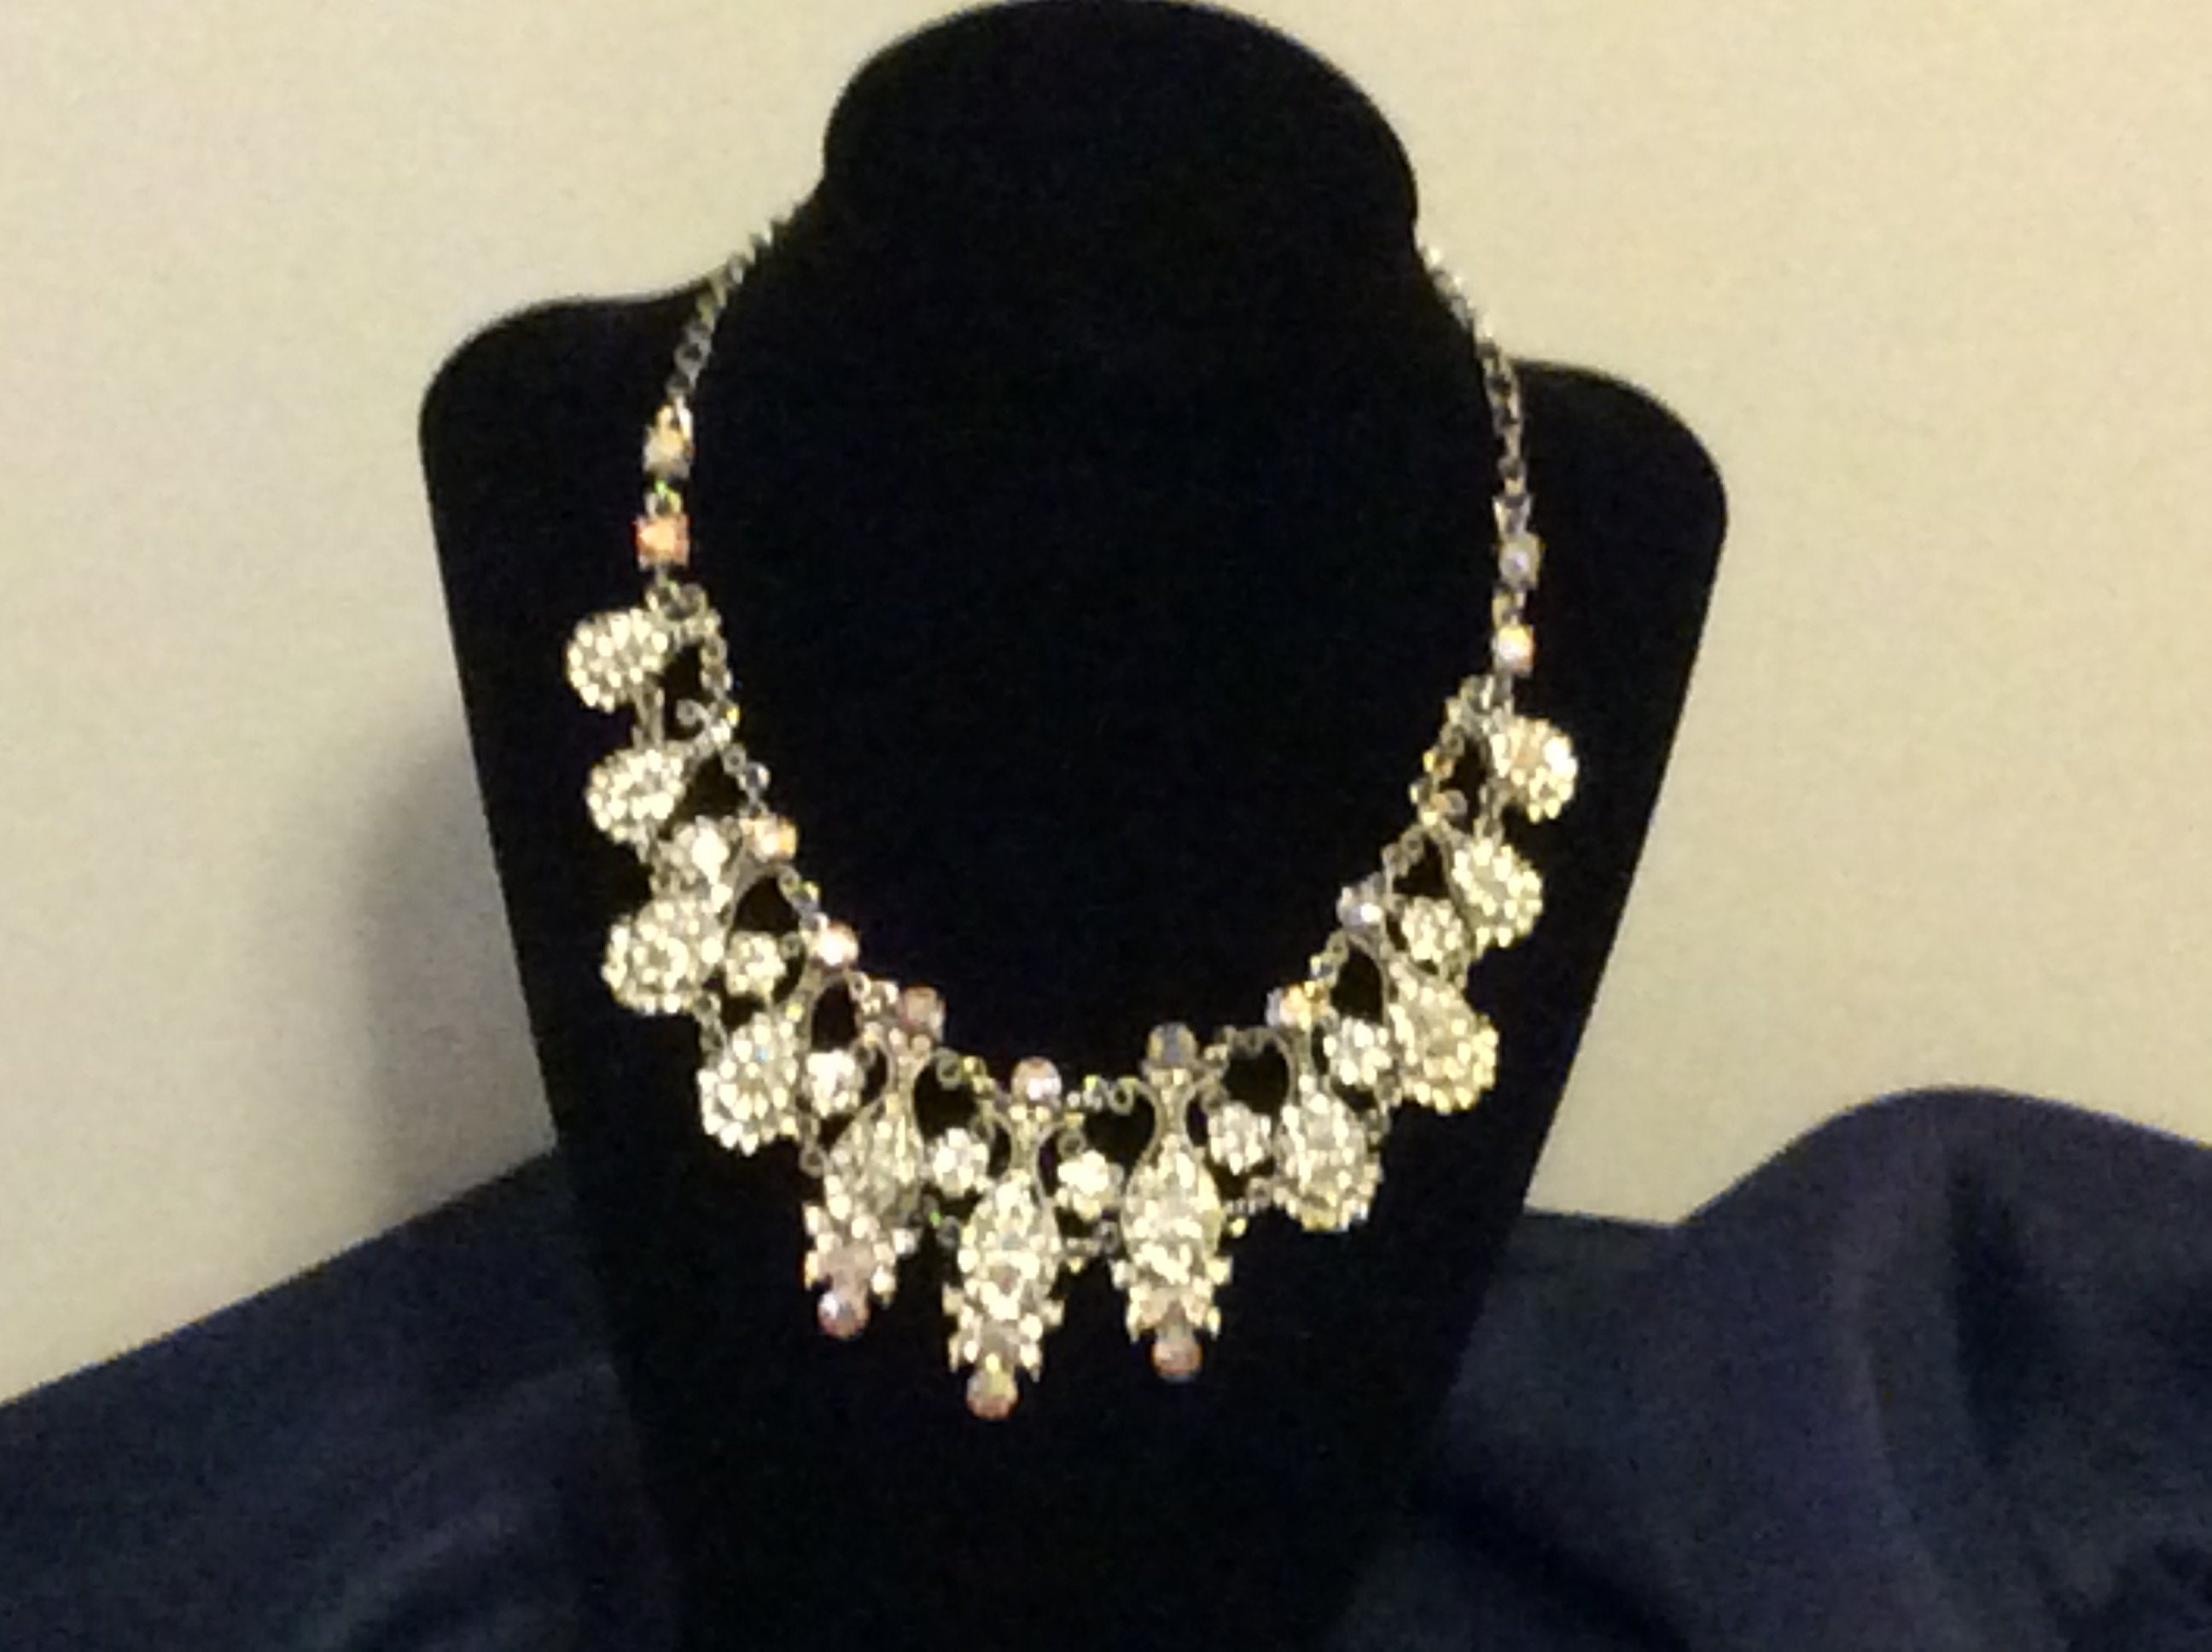 BLING to Attention - Brown Topaz & White Rhinestone Necklace - Chic Je